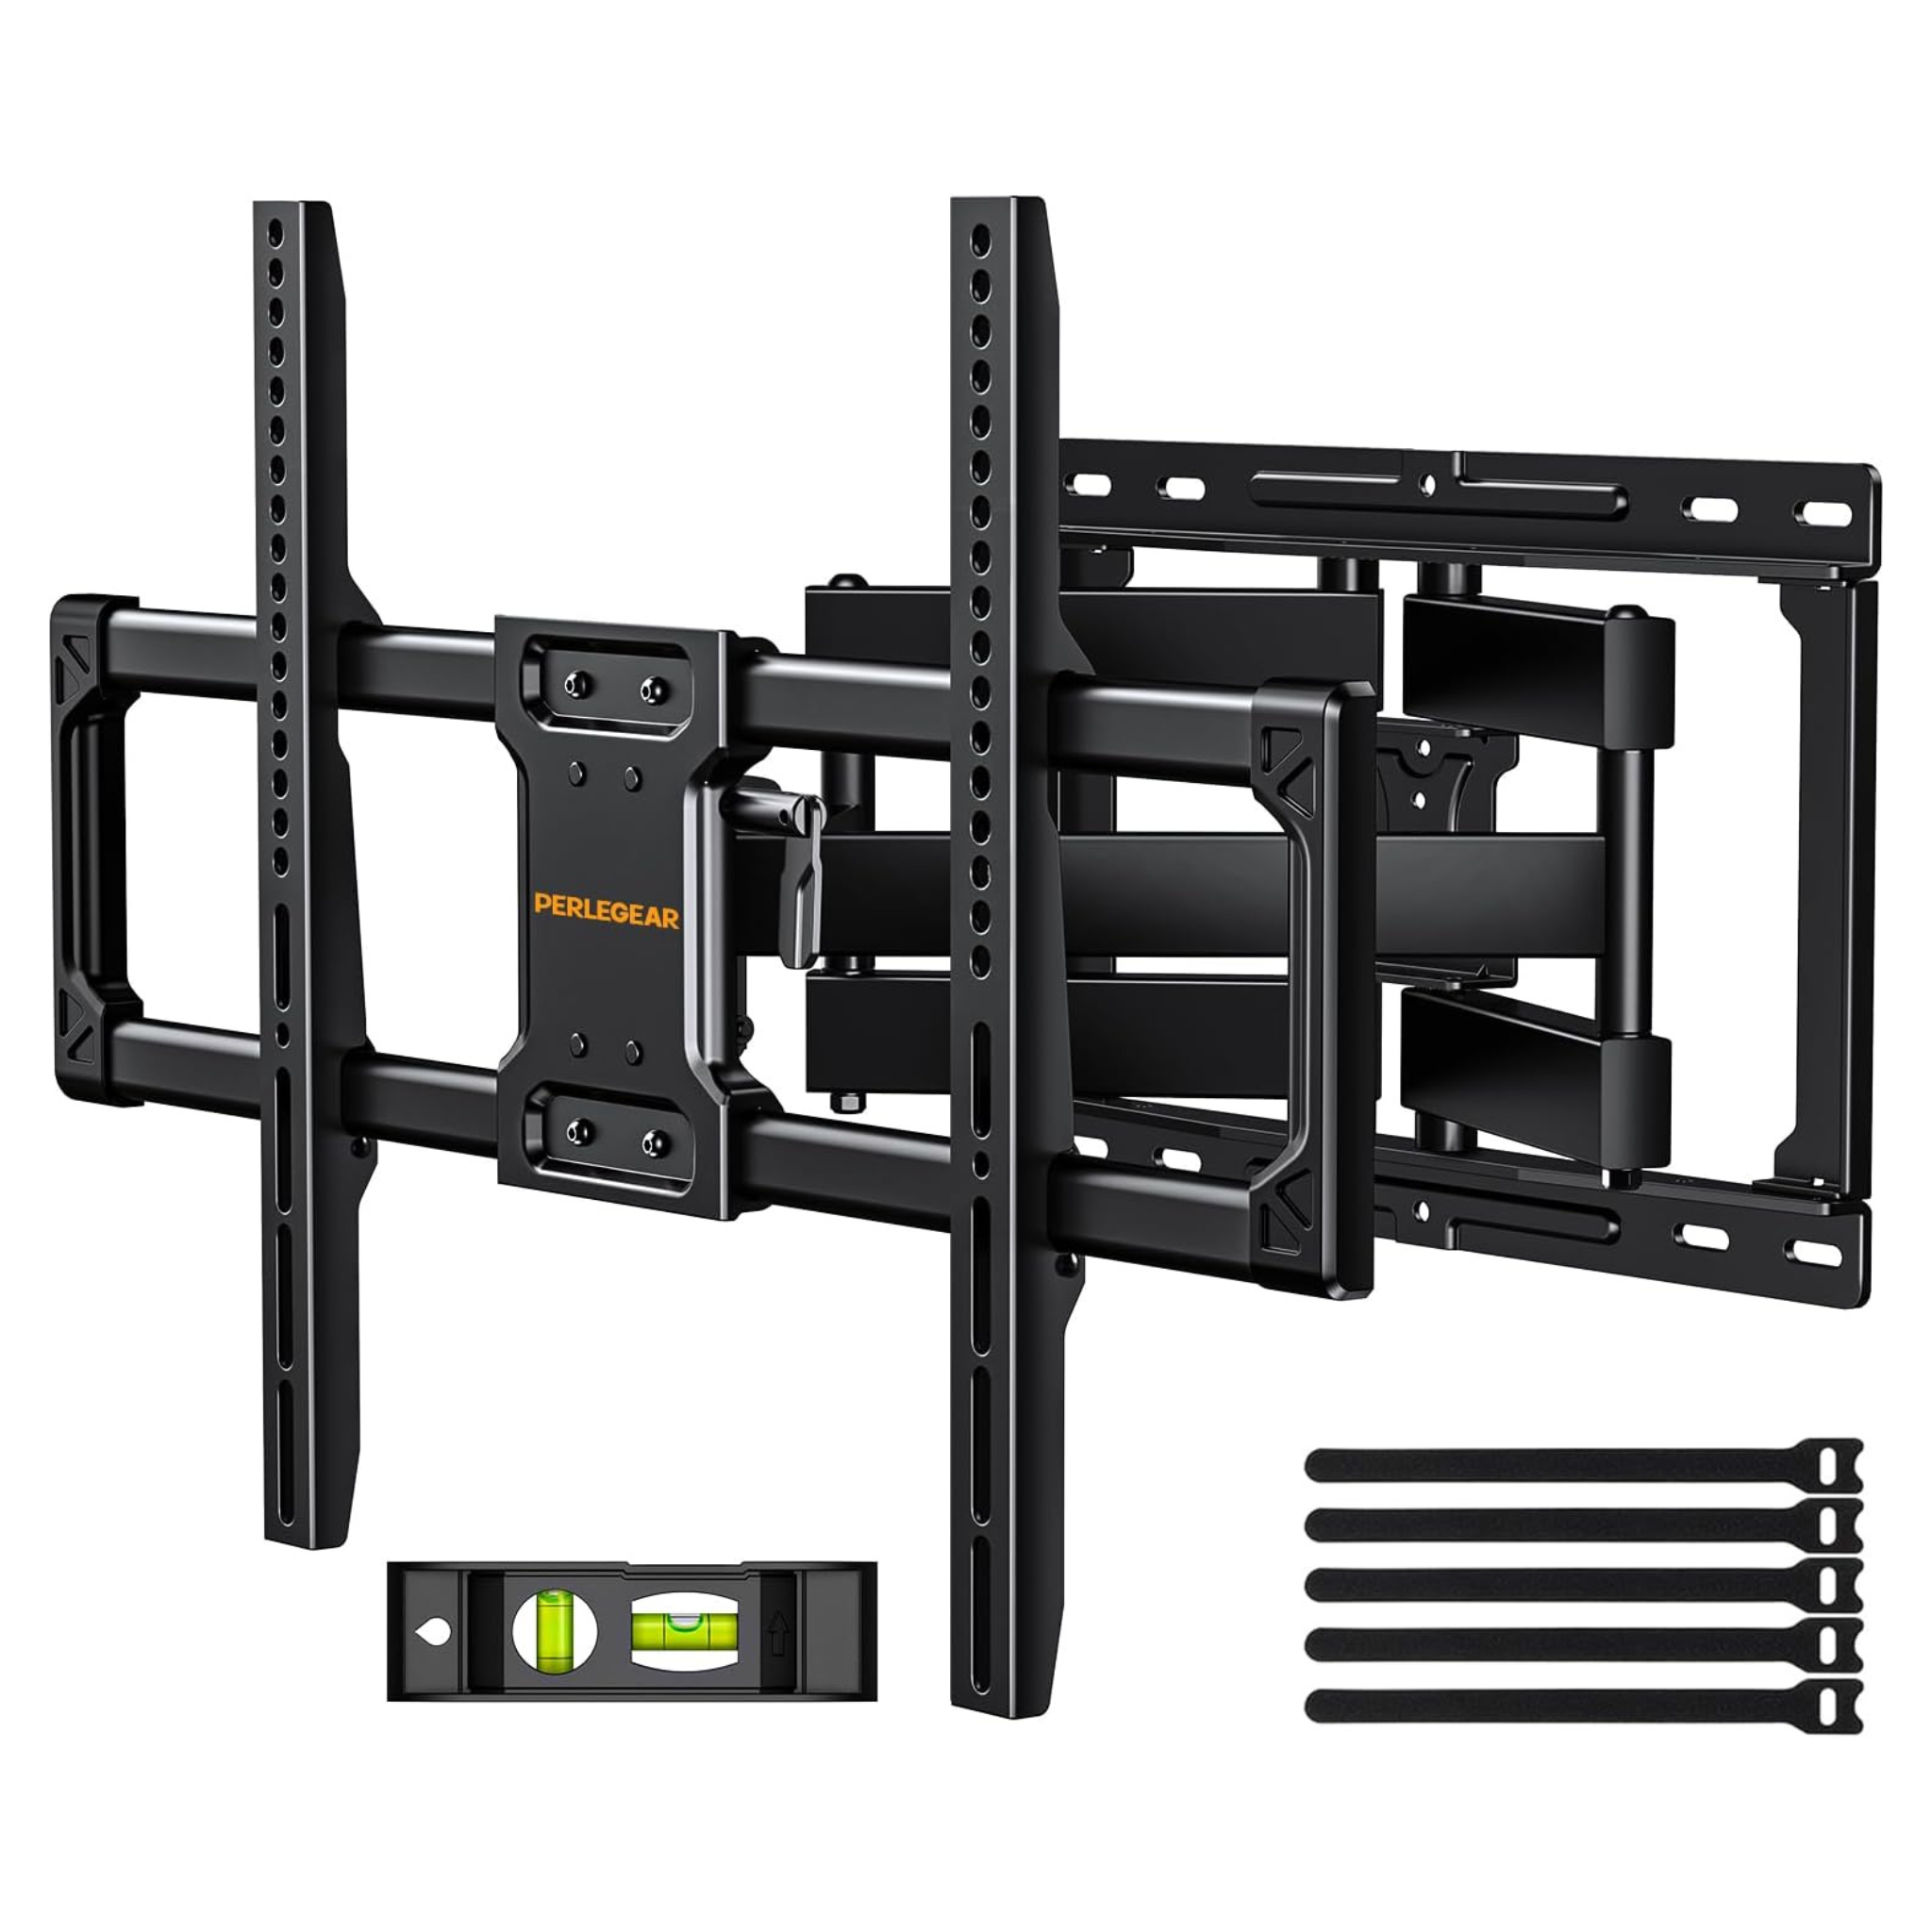 Perlegear Full Motion TV Wall Mount (for 37"- 82" TVs / Up to 100-lbs.)